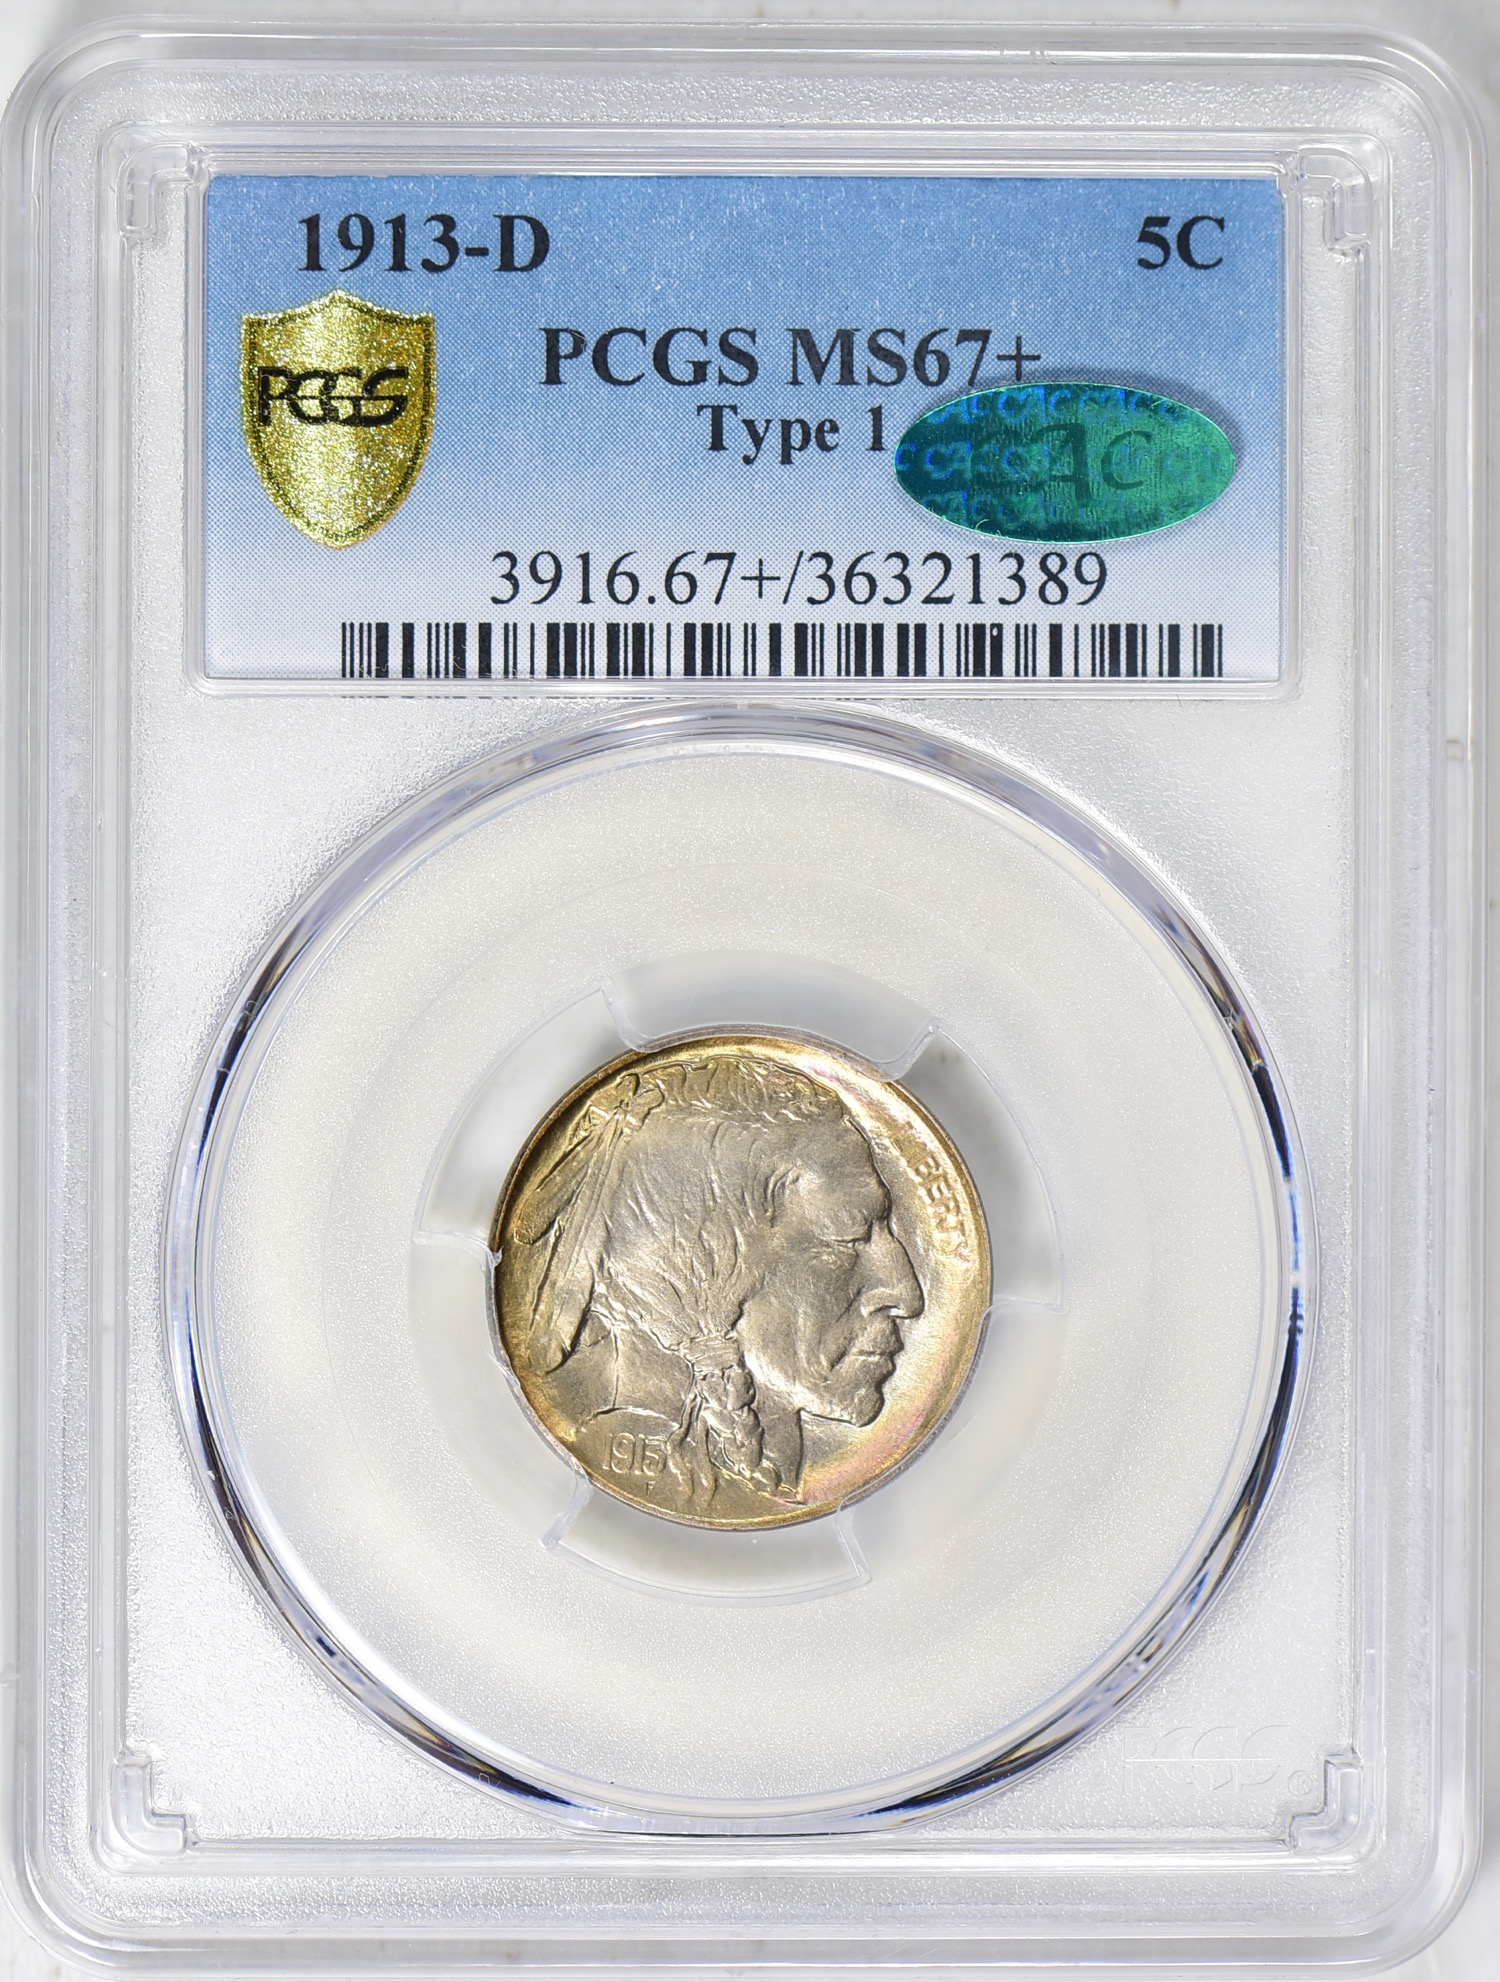 1913-D Buffalo Nickel Type 1 PCGS MS-67+ CAC. Image courtesy GreatCollections.com